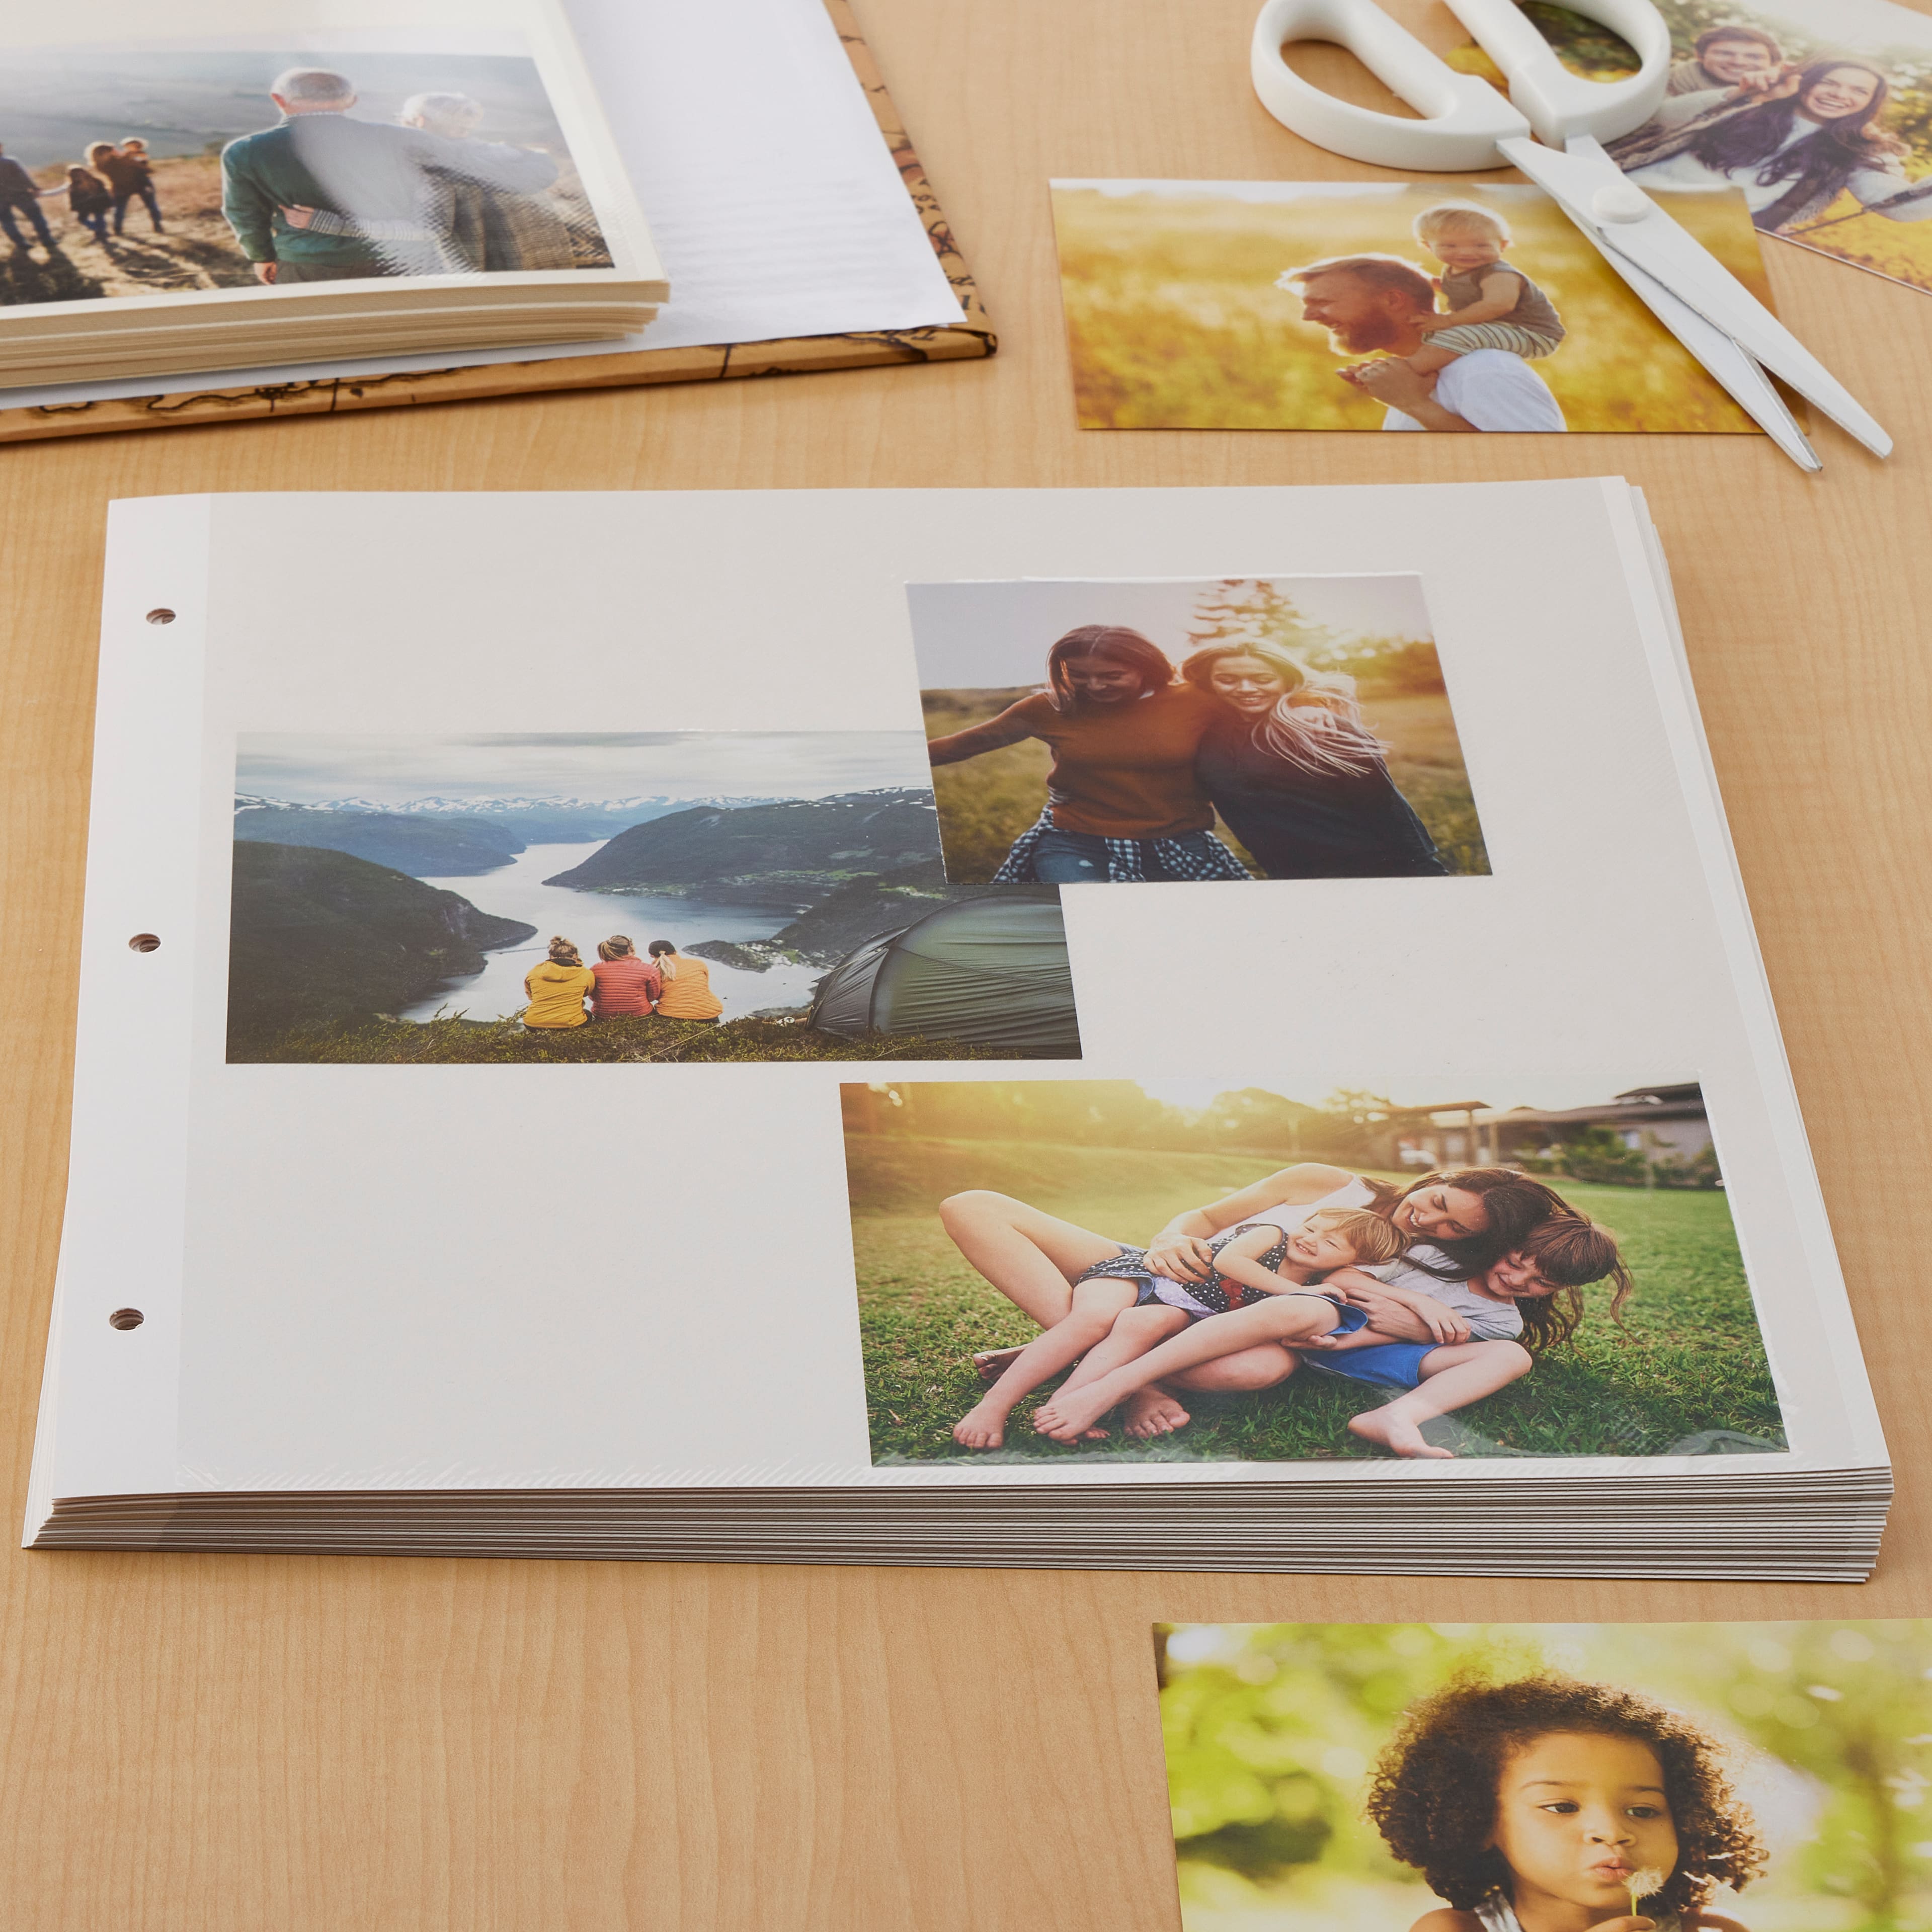 Recollections 12 x 12 Photo Album Magnetic Refill Pages - 25 ct